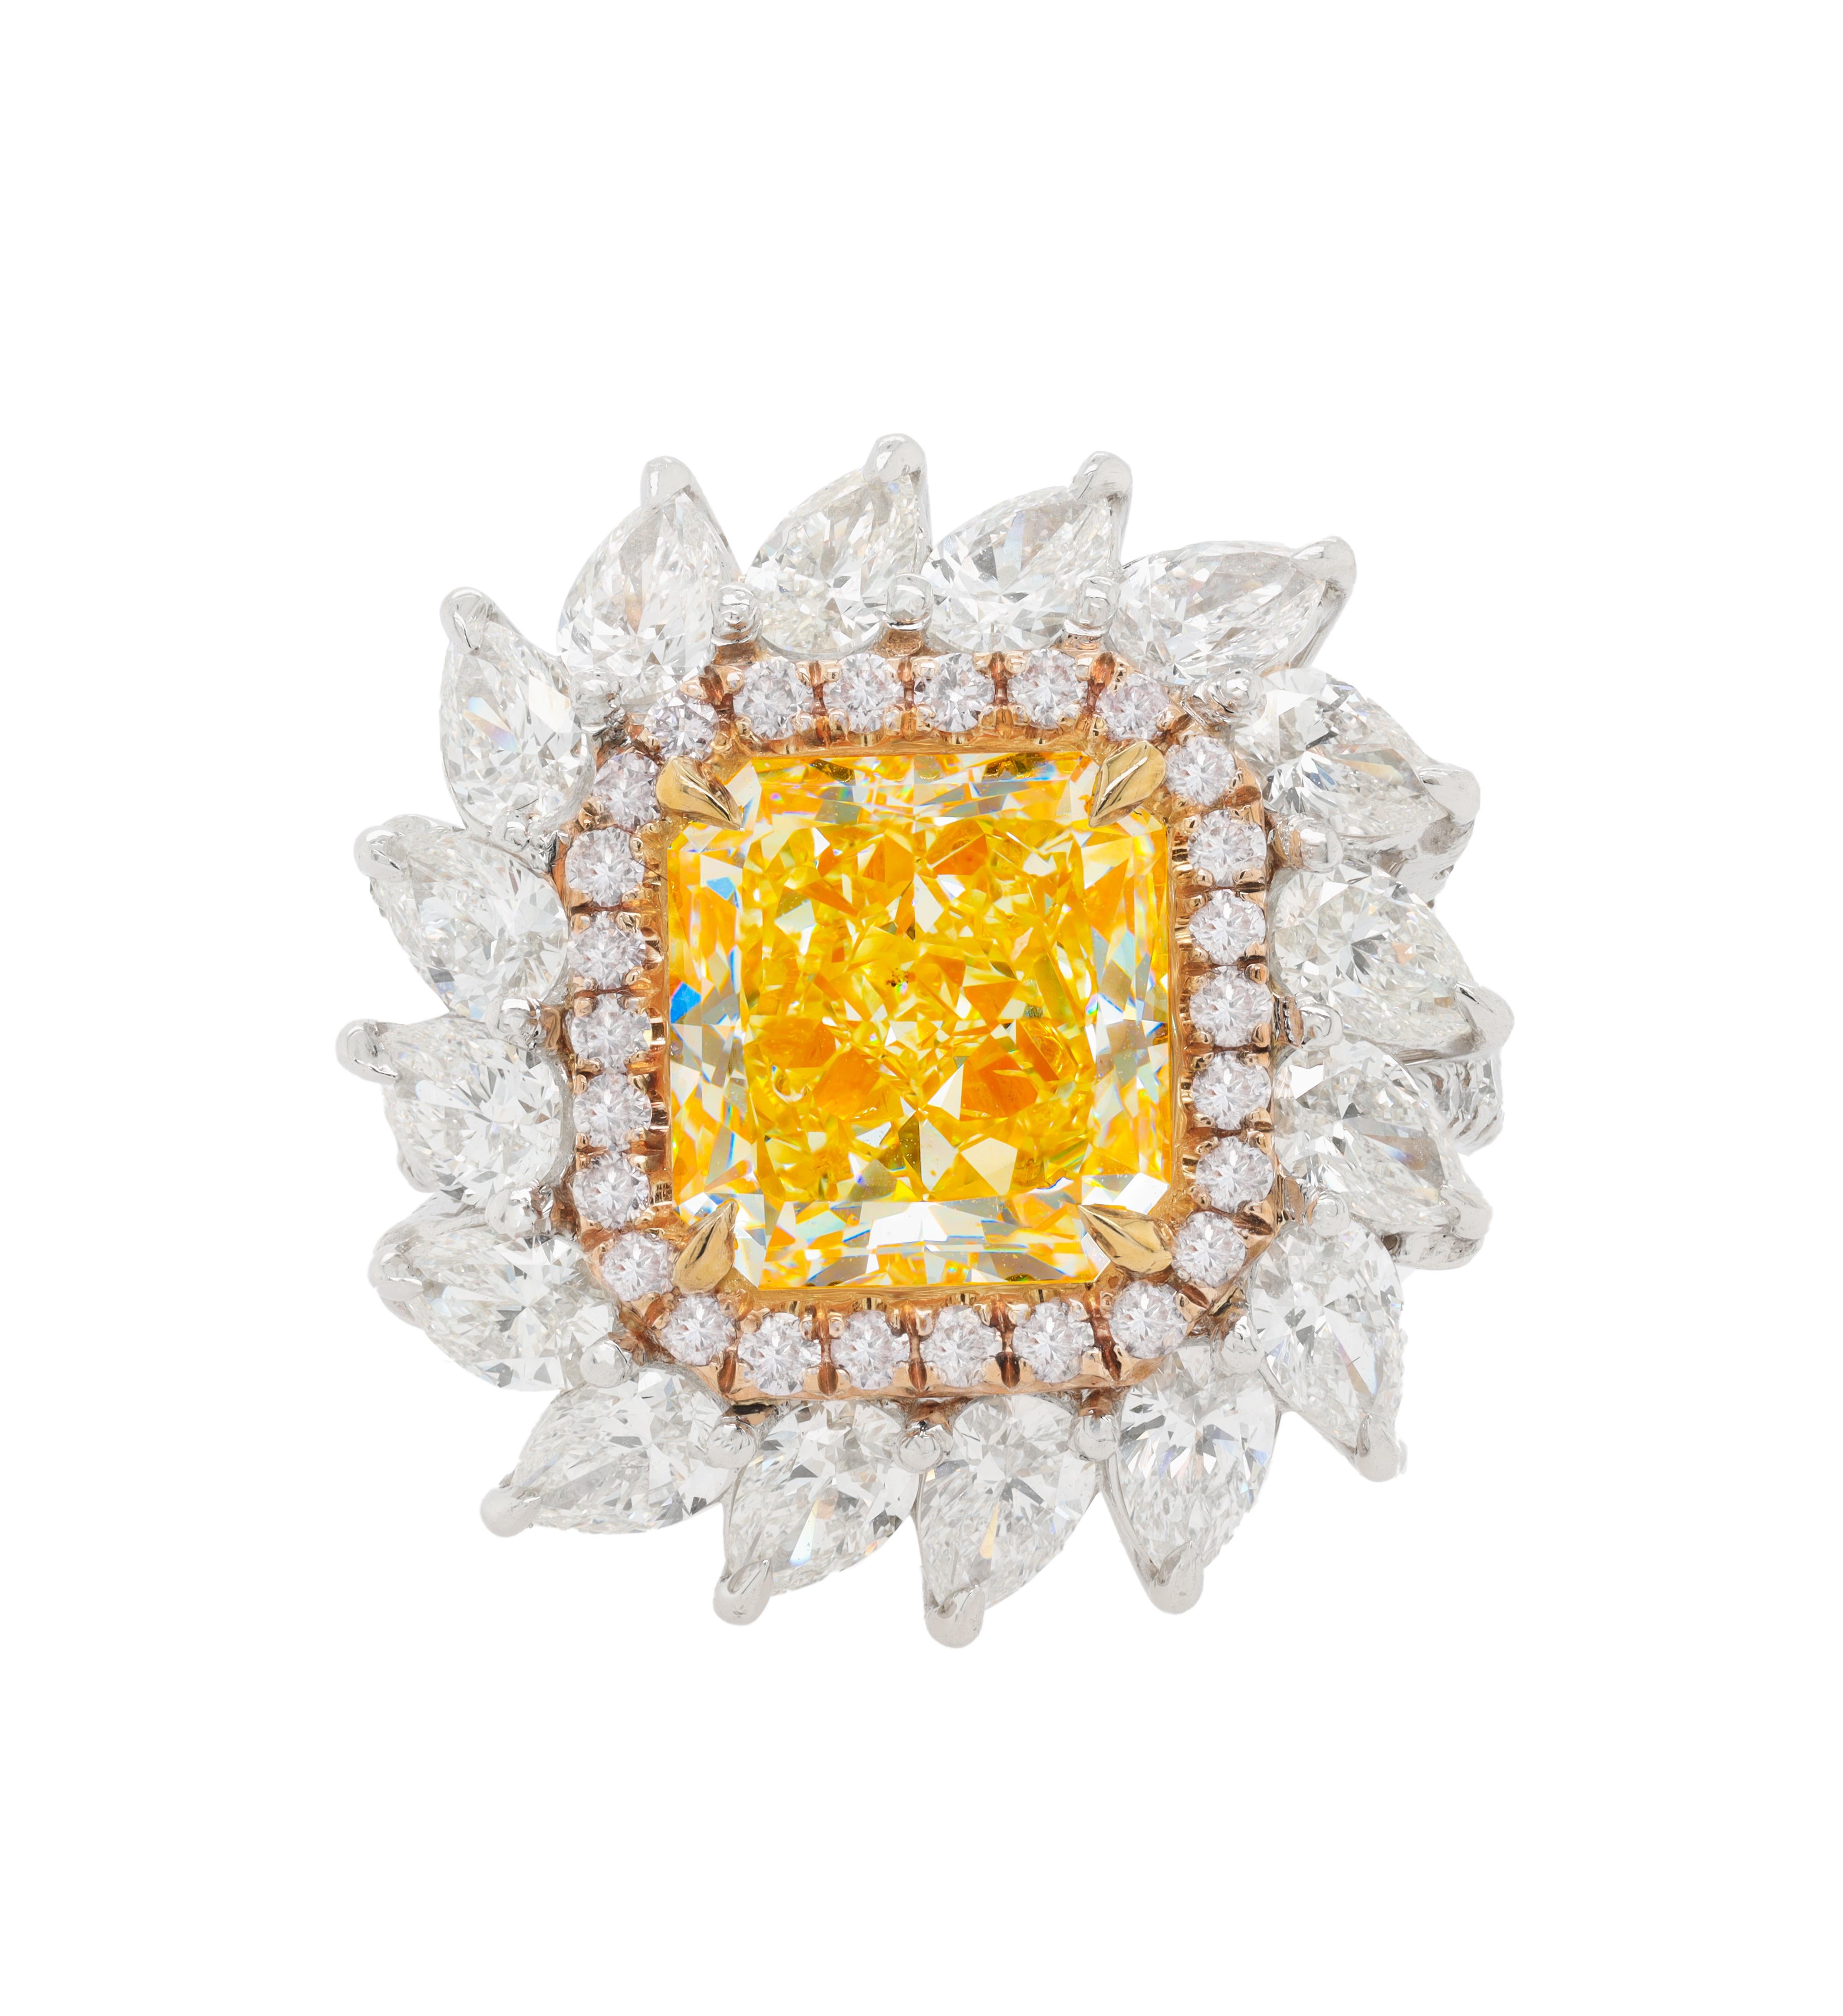 Platinum and rose and yellow gold ring featuring (radc 978)  4.57ct fancy  yellow si1 center diamond with one row halo setting with white diamonds  f-g color vs1-vs2 clarity and pink diamonds and accenting with 16 pear shape diamonds with cumulative